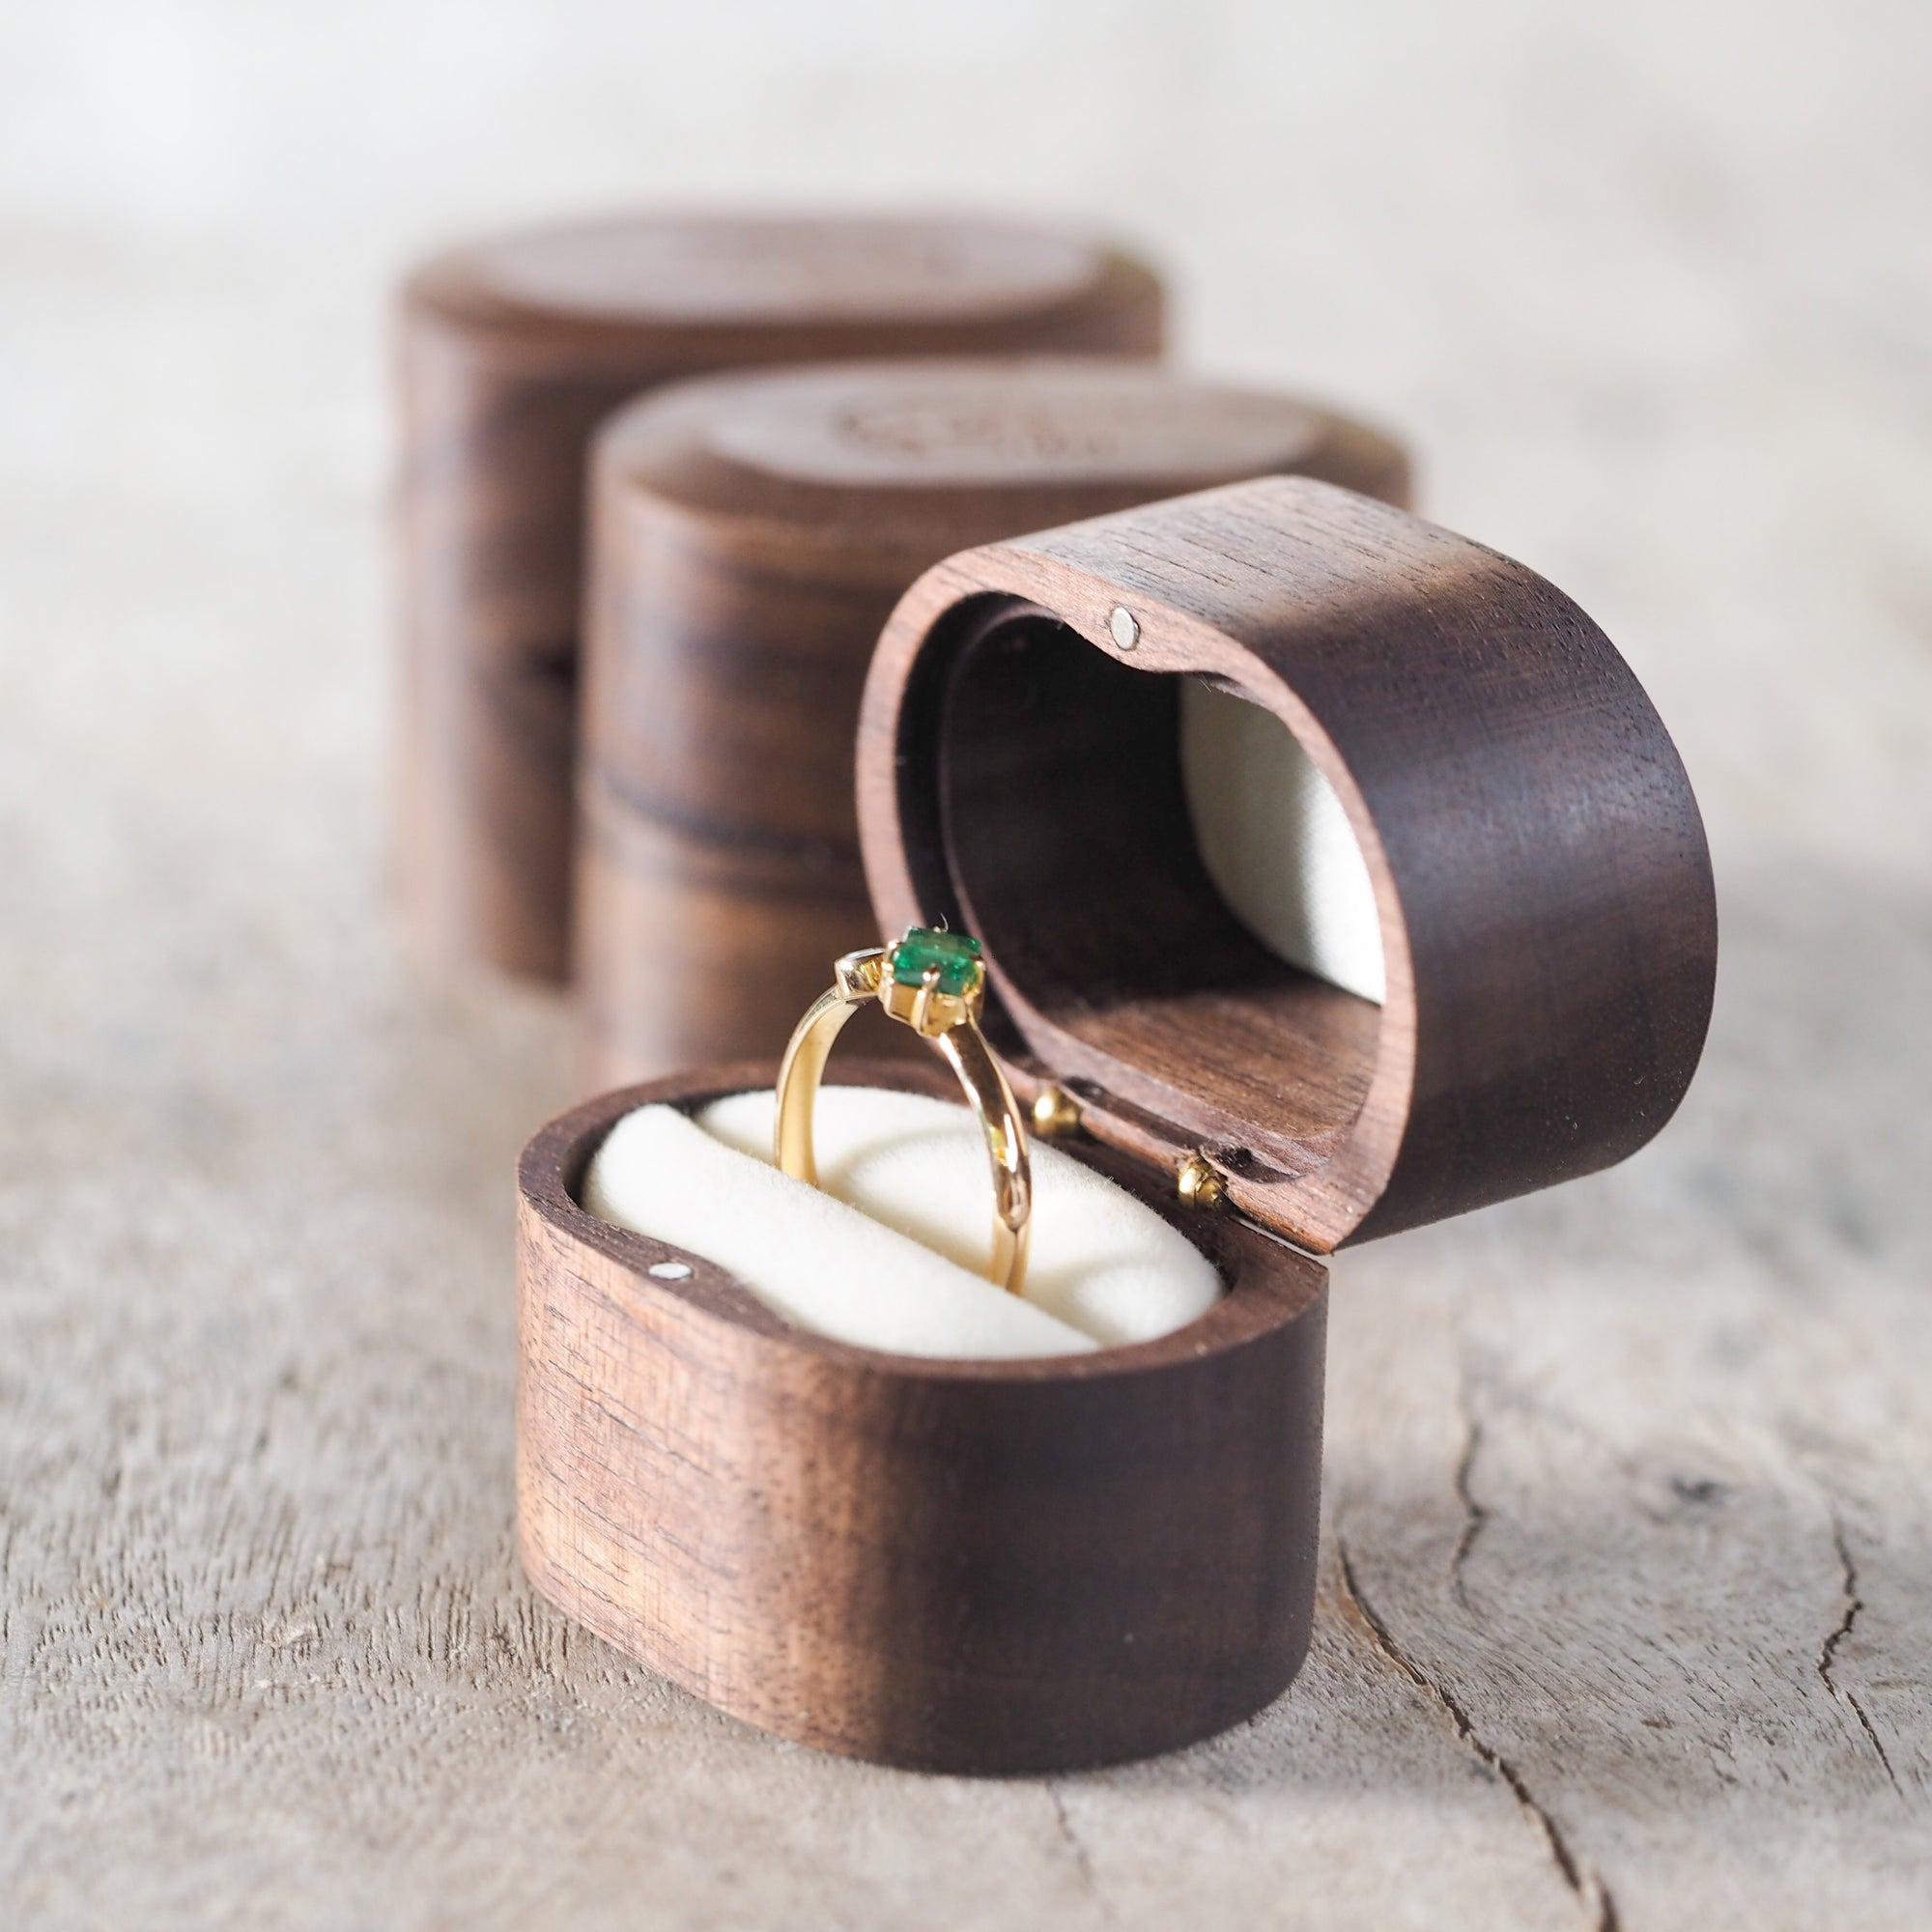 Ring Boxes for